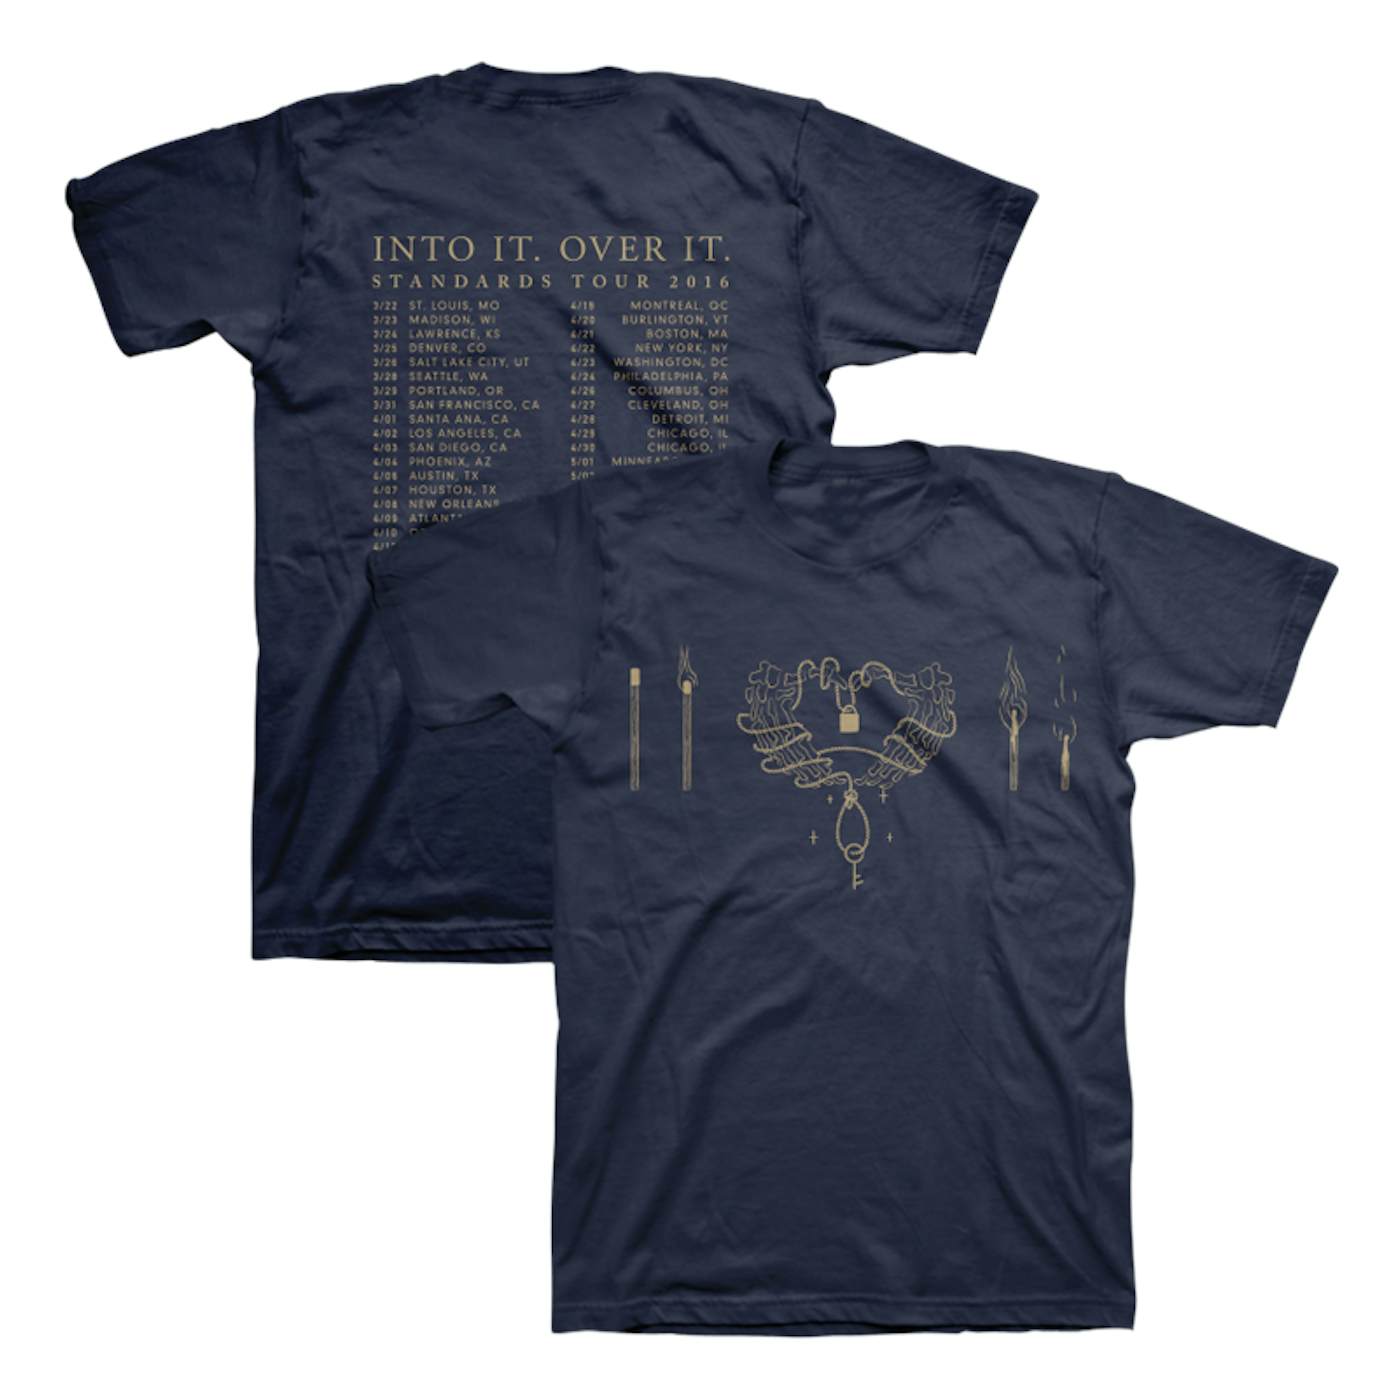 Into It. Over It. Standards Tour Tee